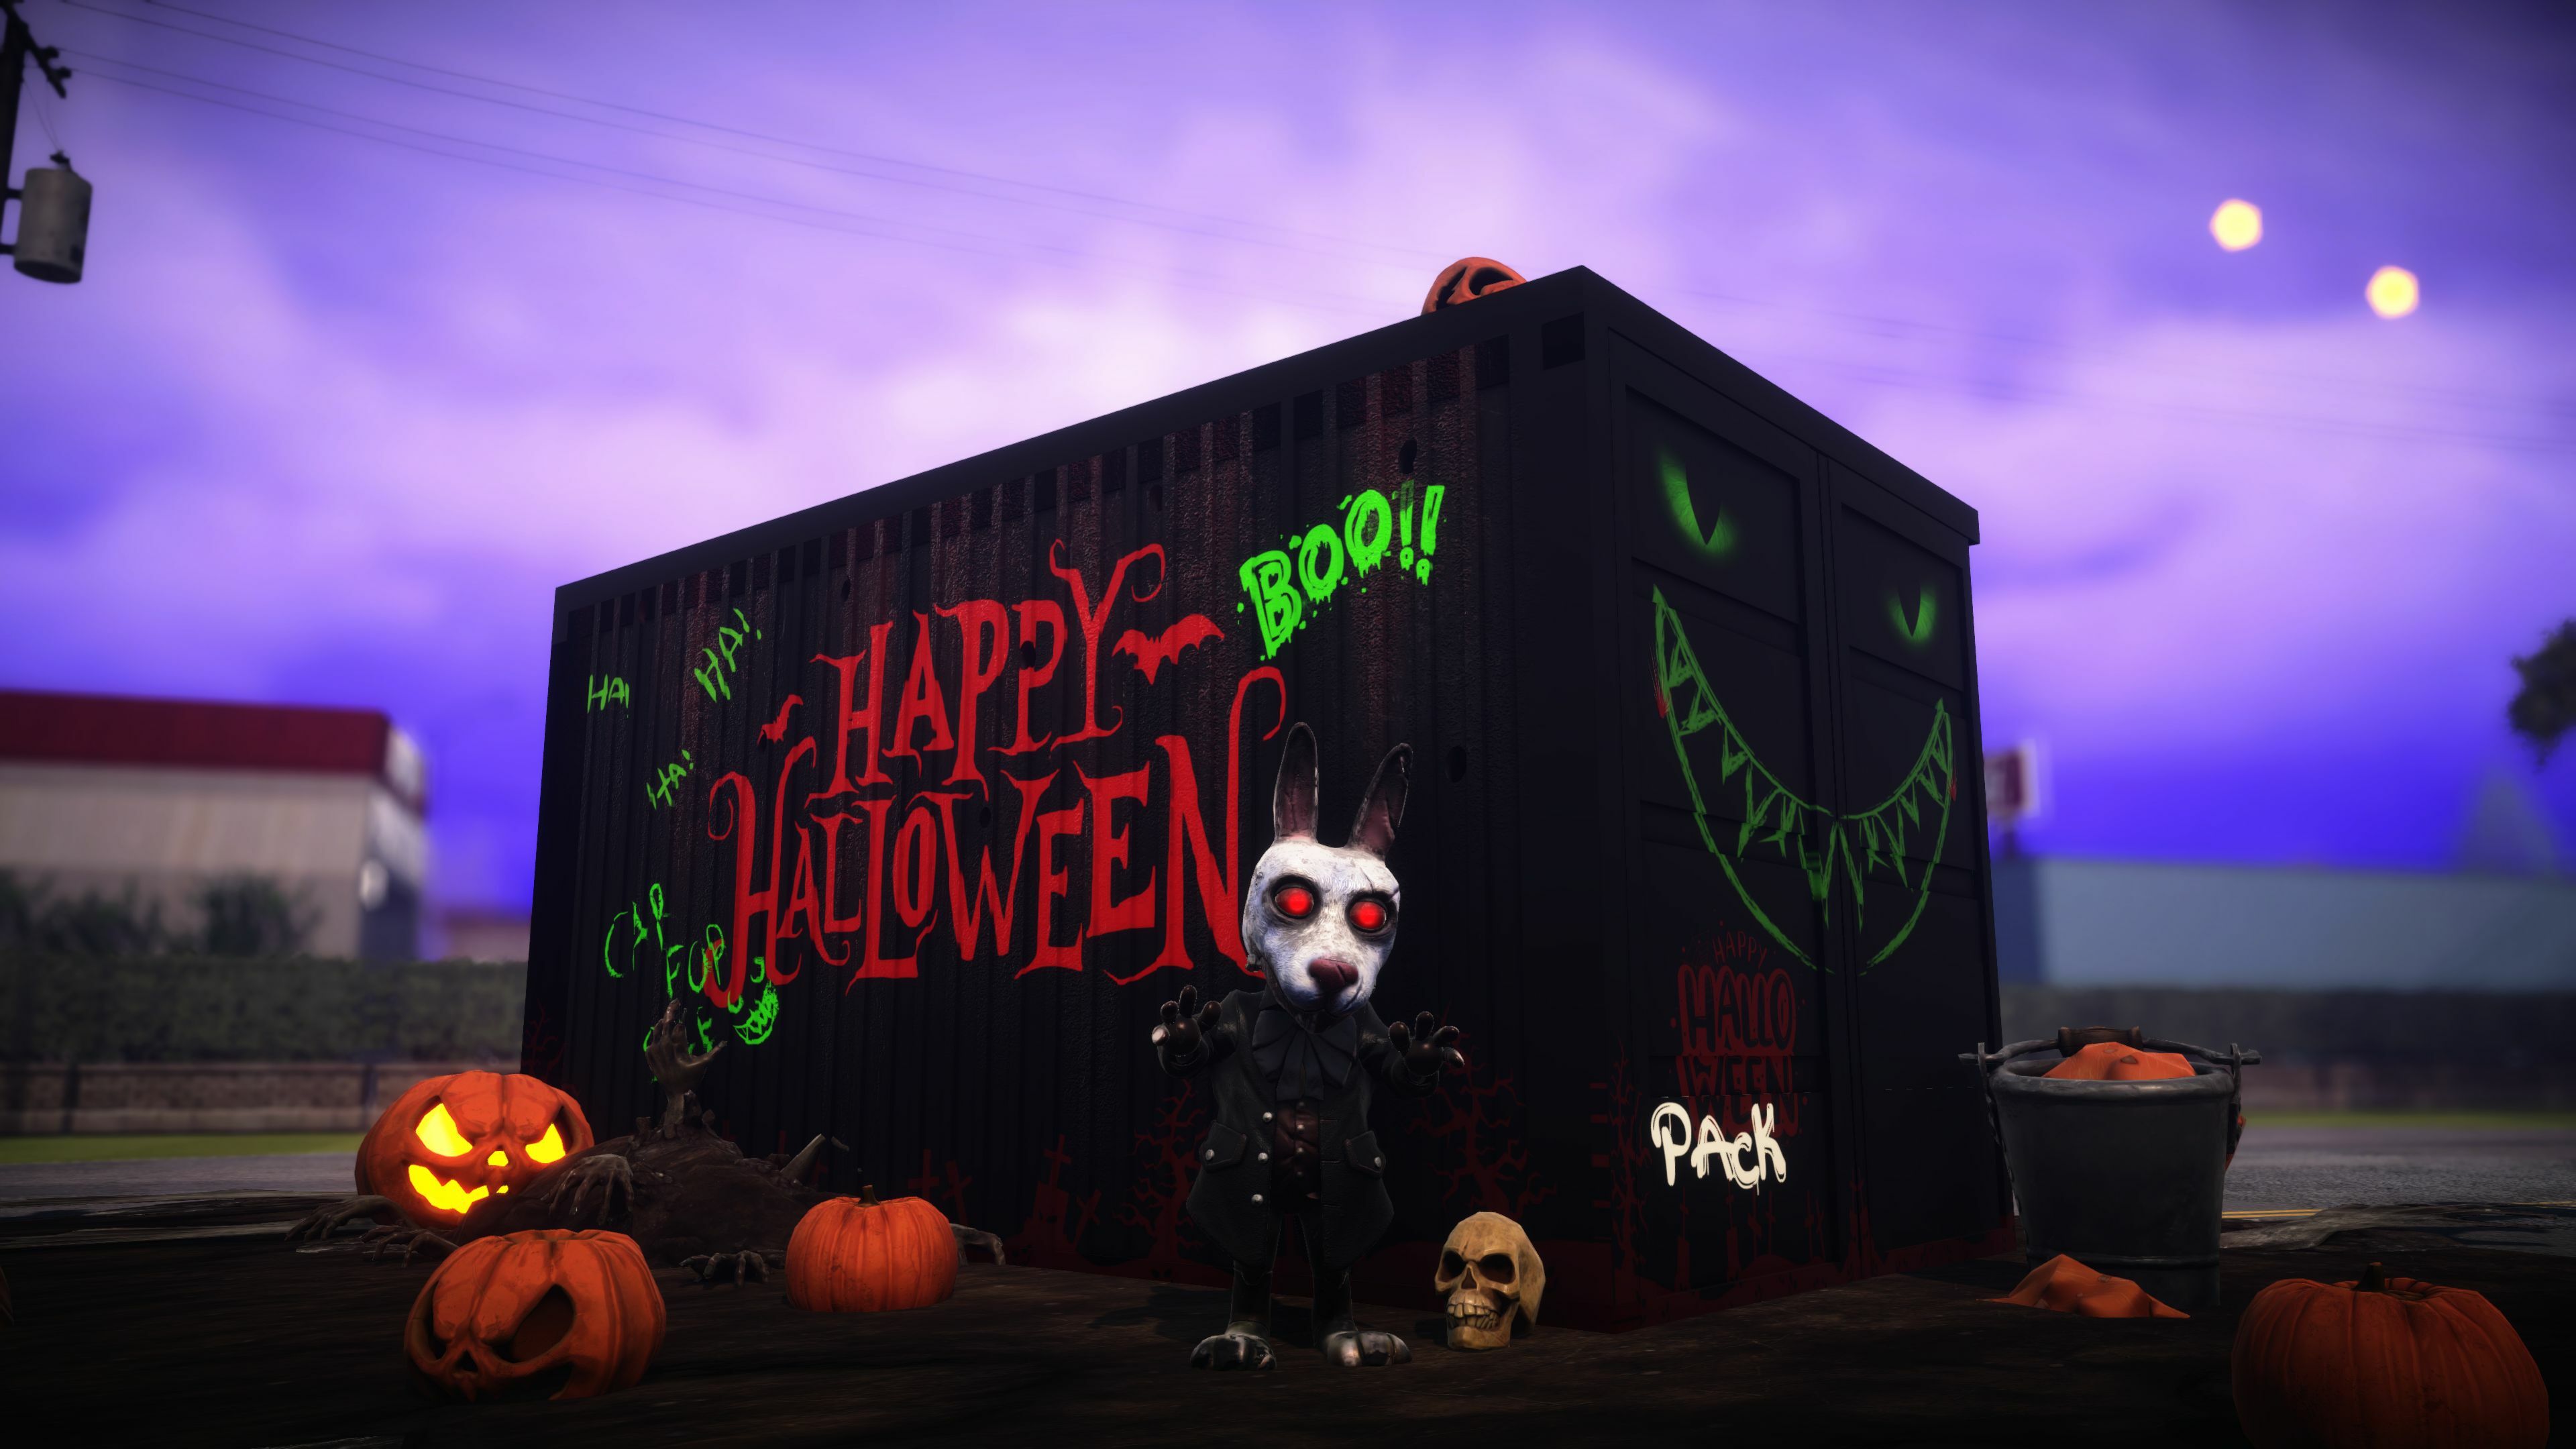 NEW HALLOWEEN UPDATE LOCATION AND INFORMATION